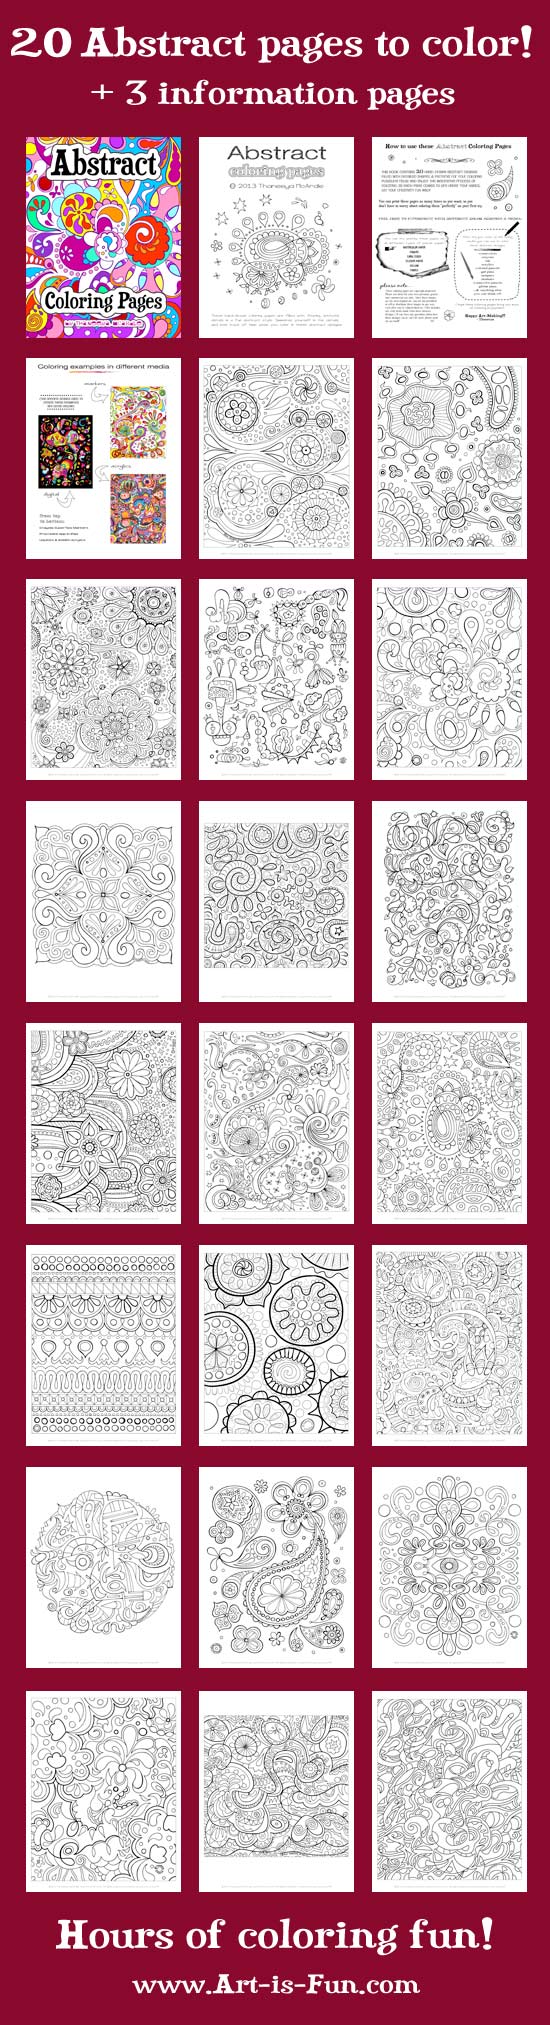 abstract space coloring pages - photo #34